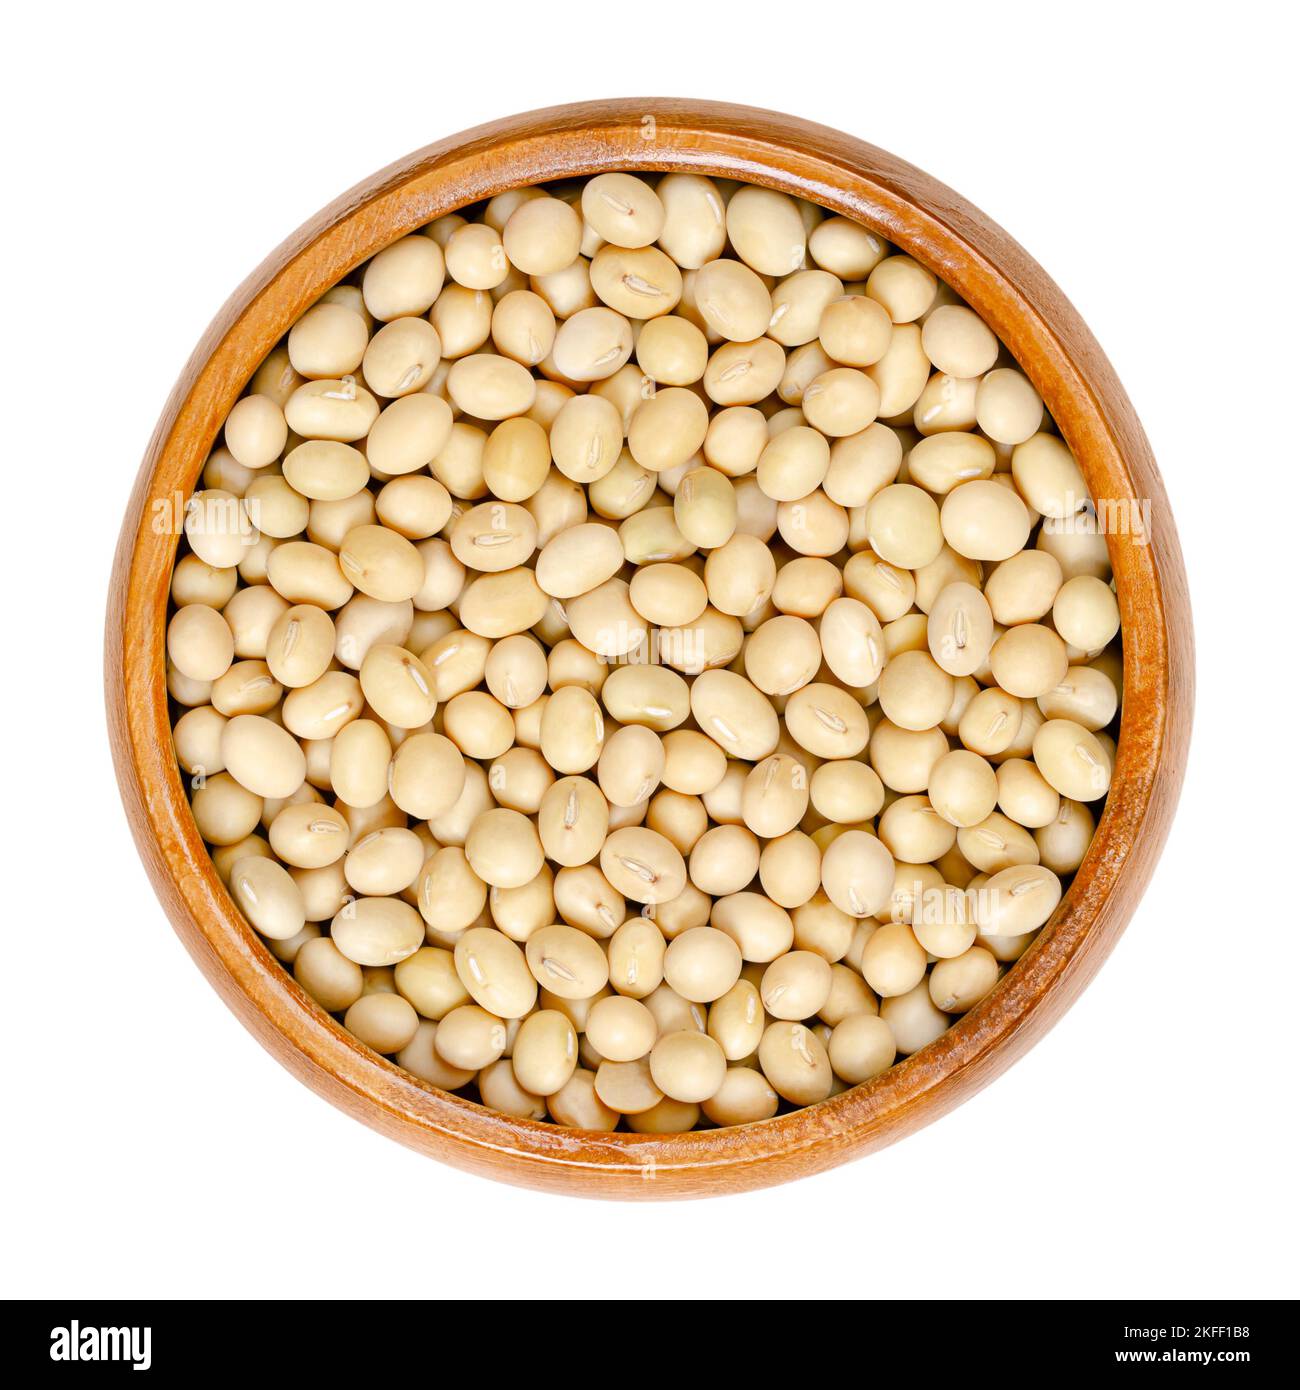 Raw soybeans, in a wooden bowl. Whole and dried seeds of the legume and oilseed Glycine max, also known as soy bean or soya bean. Stock Photo